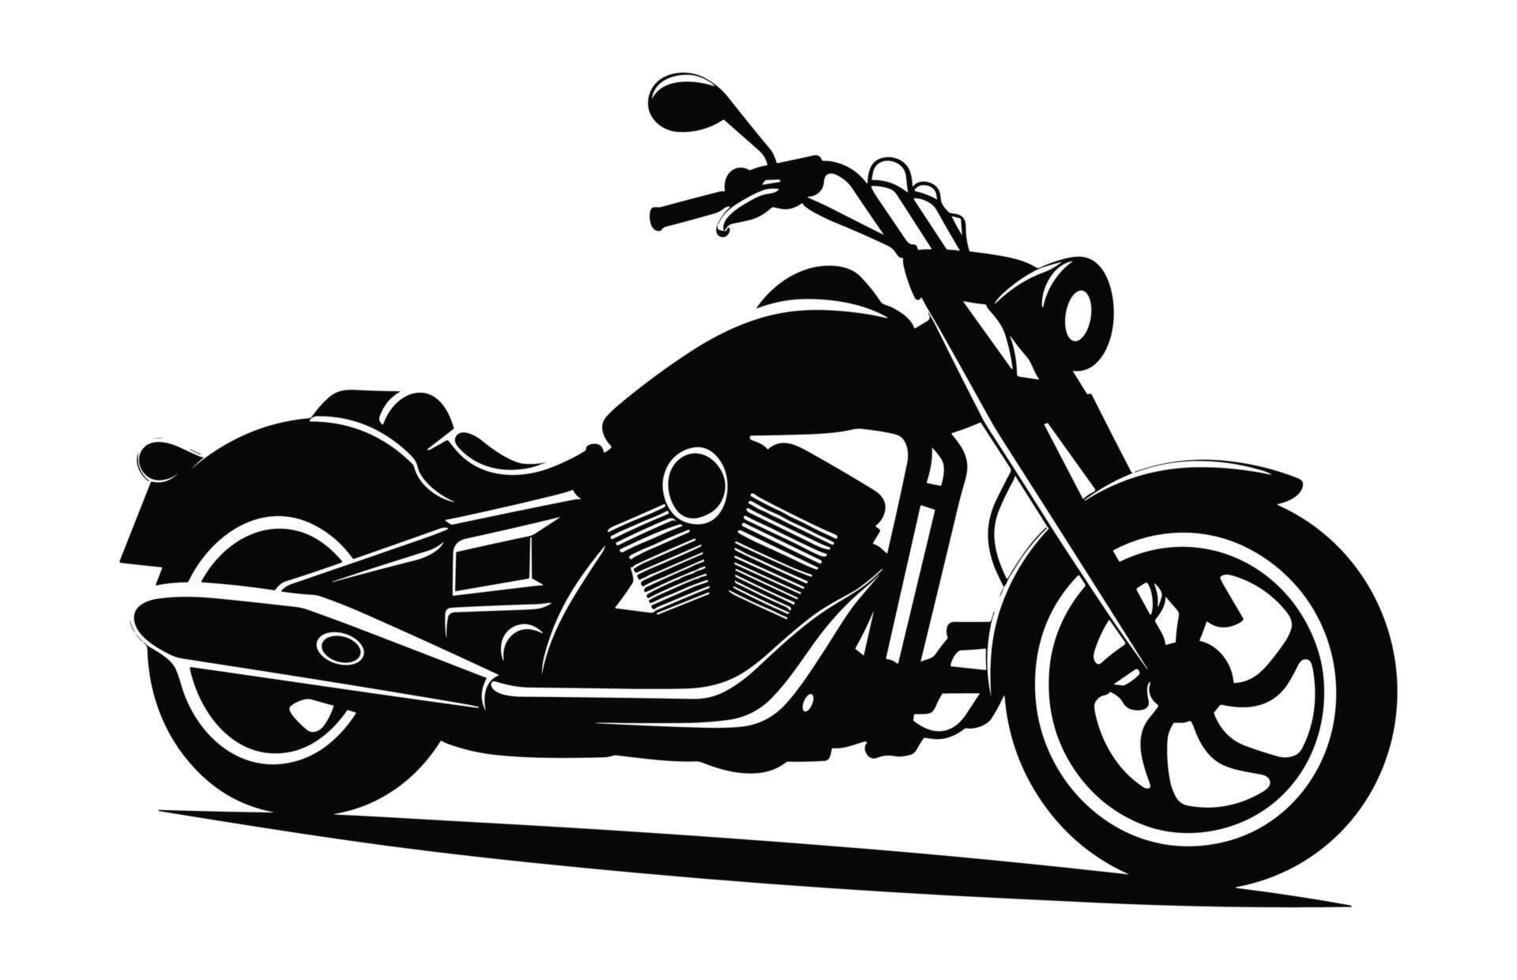 Motorcycle Silhouette vector black and white isolated on a white background, Motorbike Silhouette Clipart